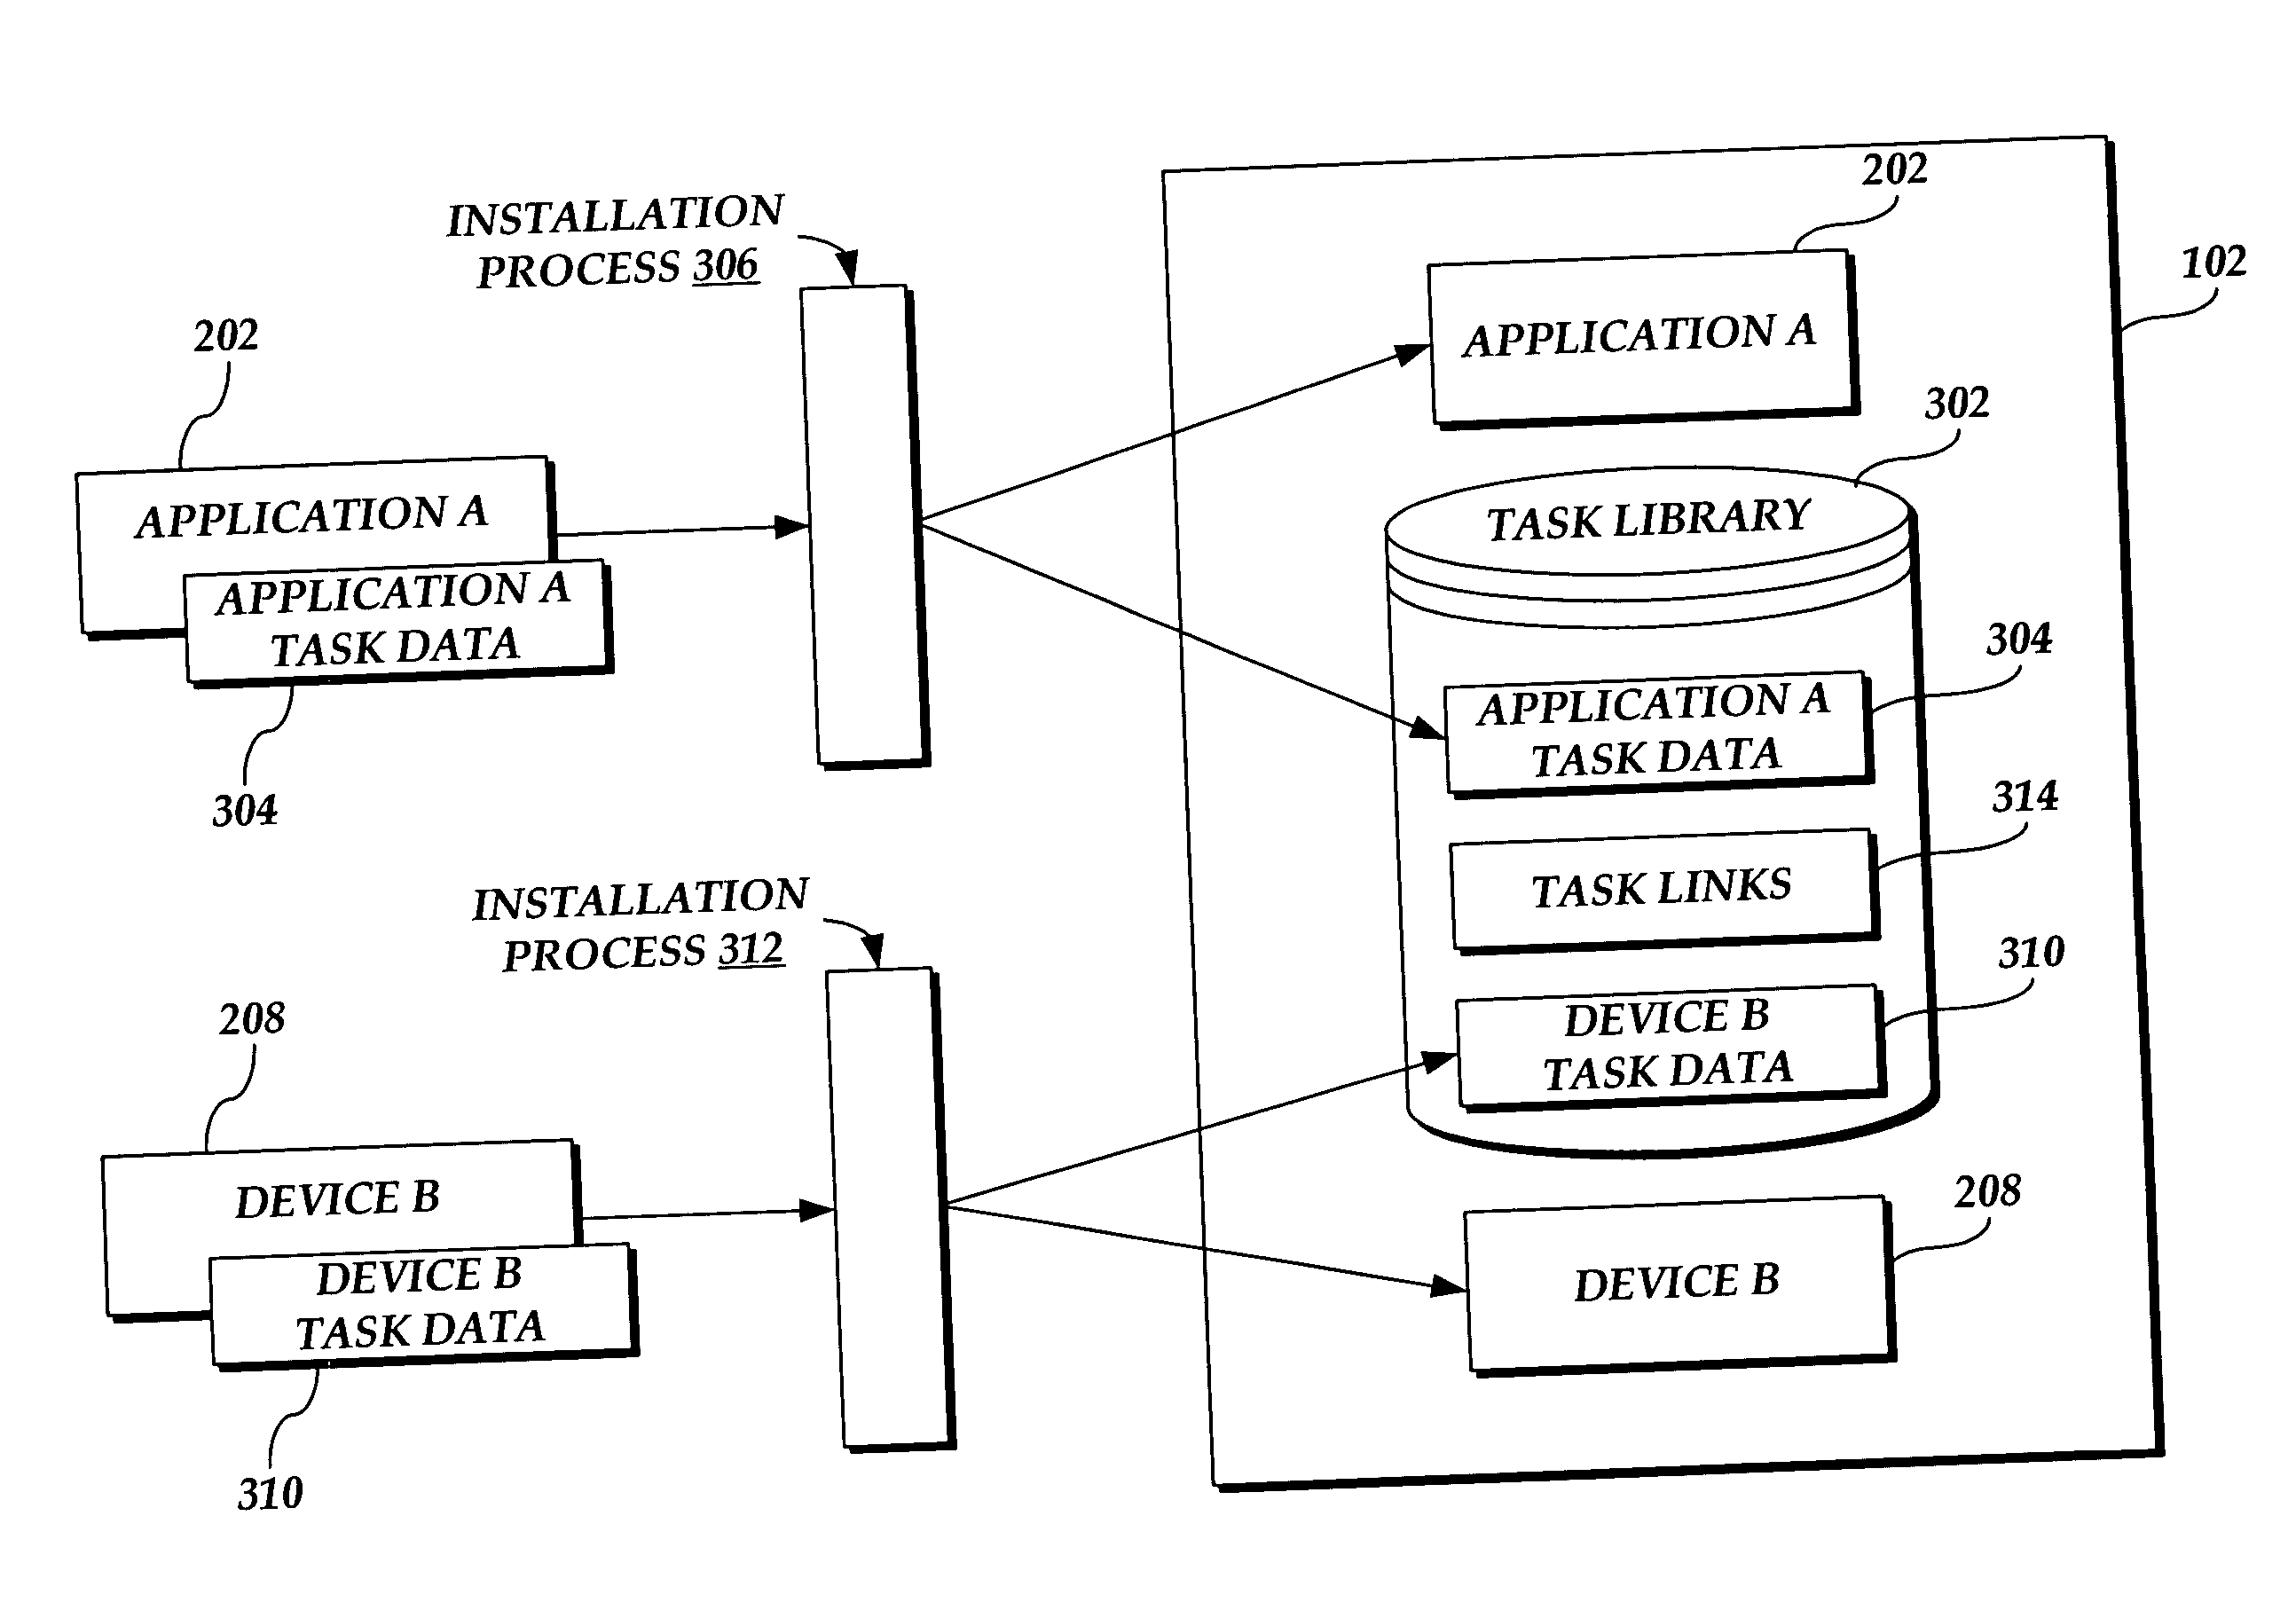 Task library of task data for a plurality of components on a computer system